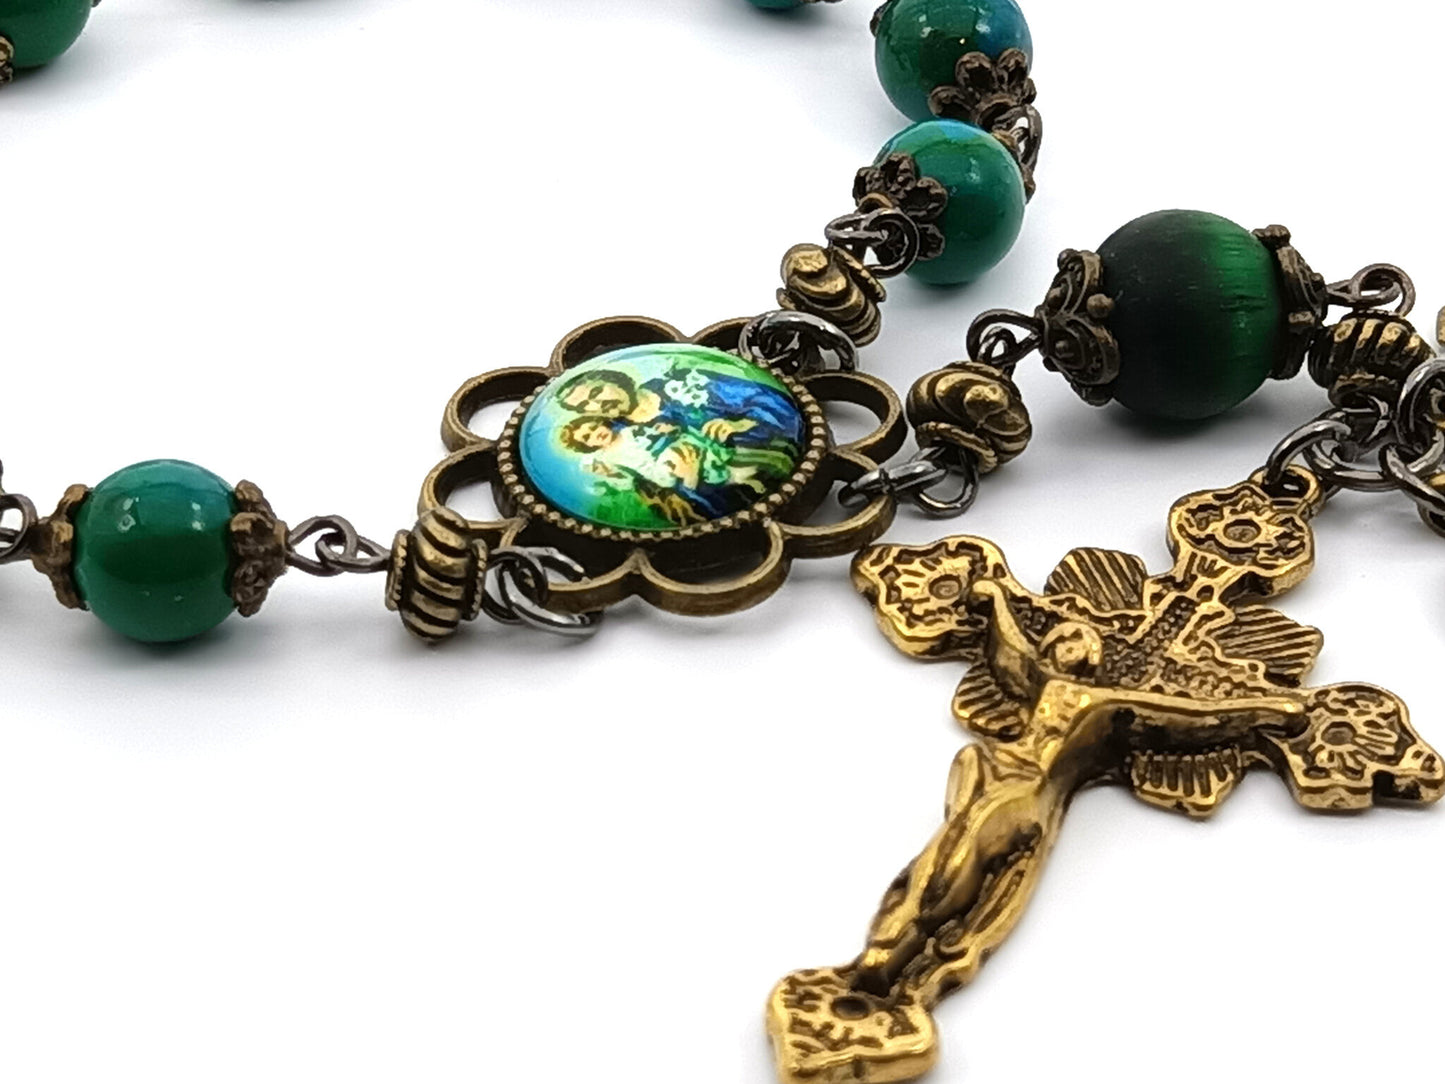 Saint Joseph unique rosary beads single decade with green gemstone beads, bronze crucifix and St. Joseph picture centre medal.